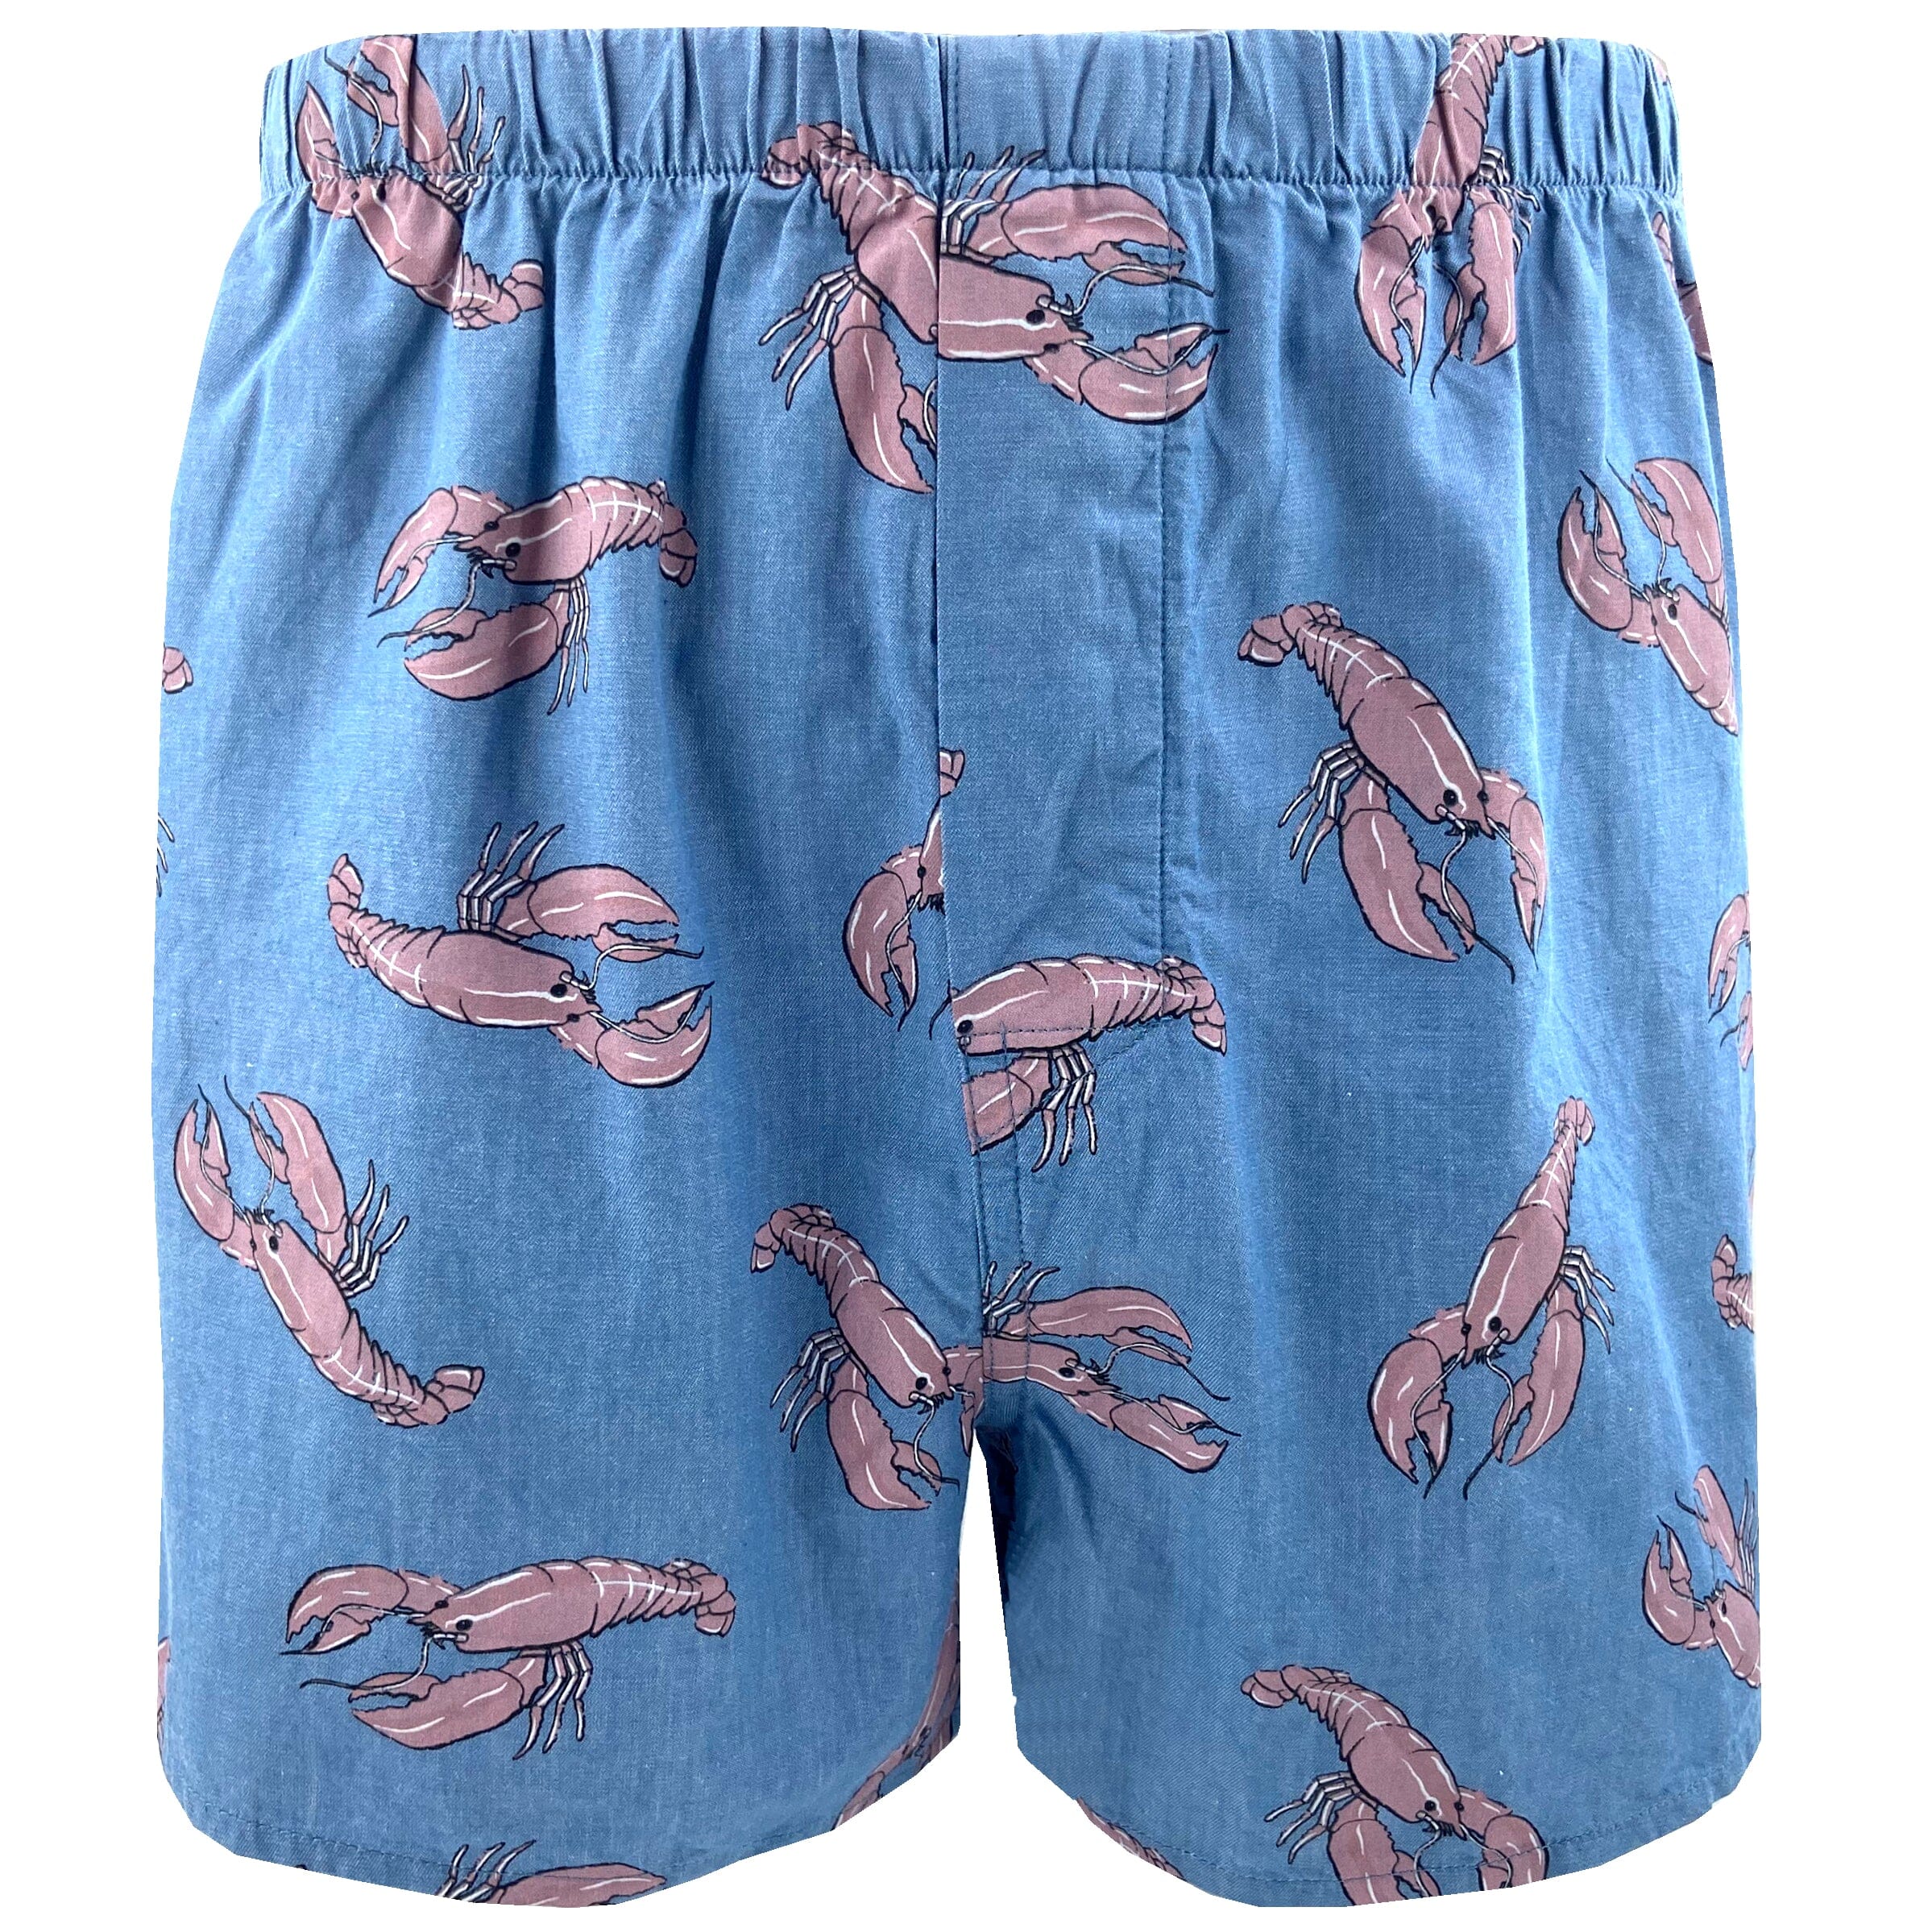 Buy Men's Relaxed Fit Boxer Shorts with Lobster Pattern Novelty Print